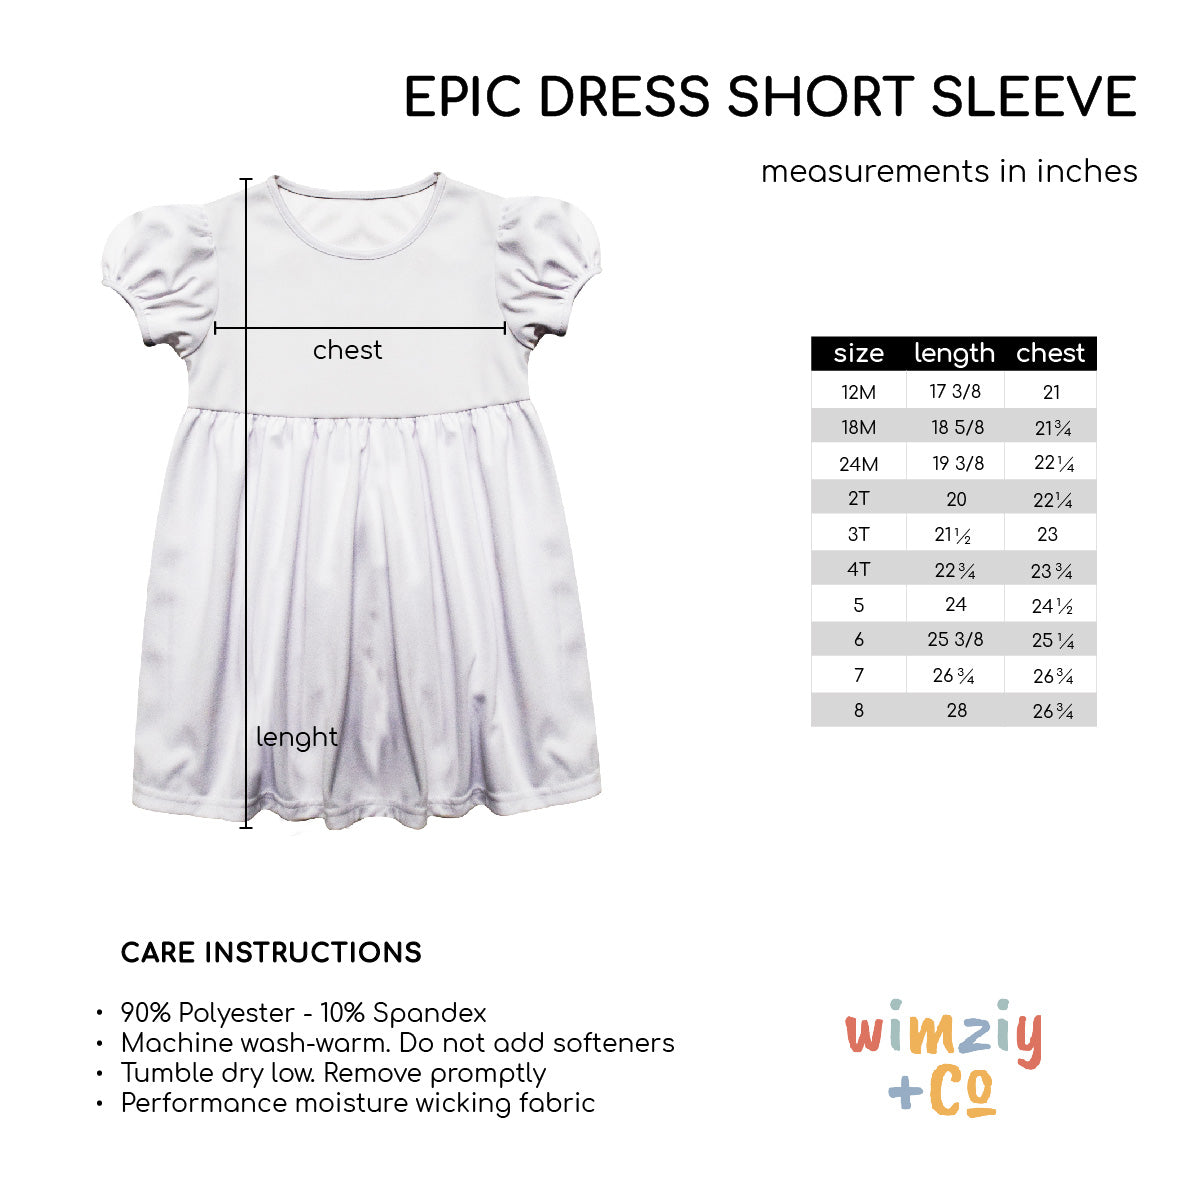 Back To School  White and Blue Denim Short Sleeve Epic Dress - Wimziy&Co.